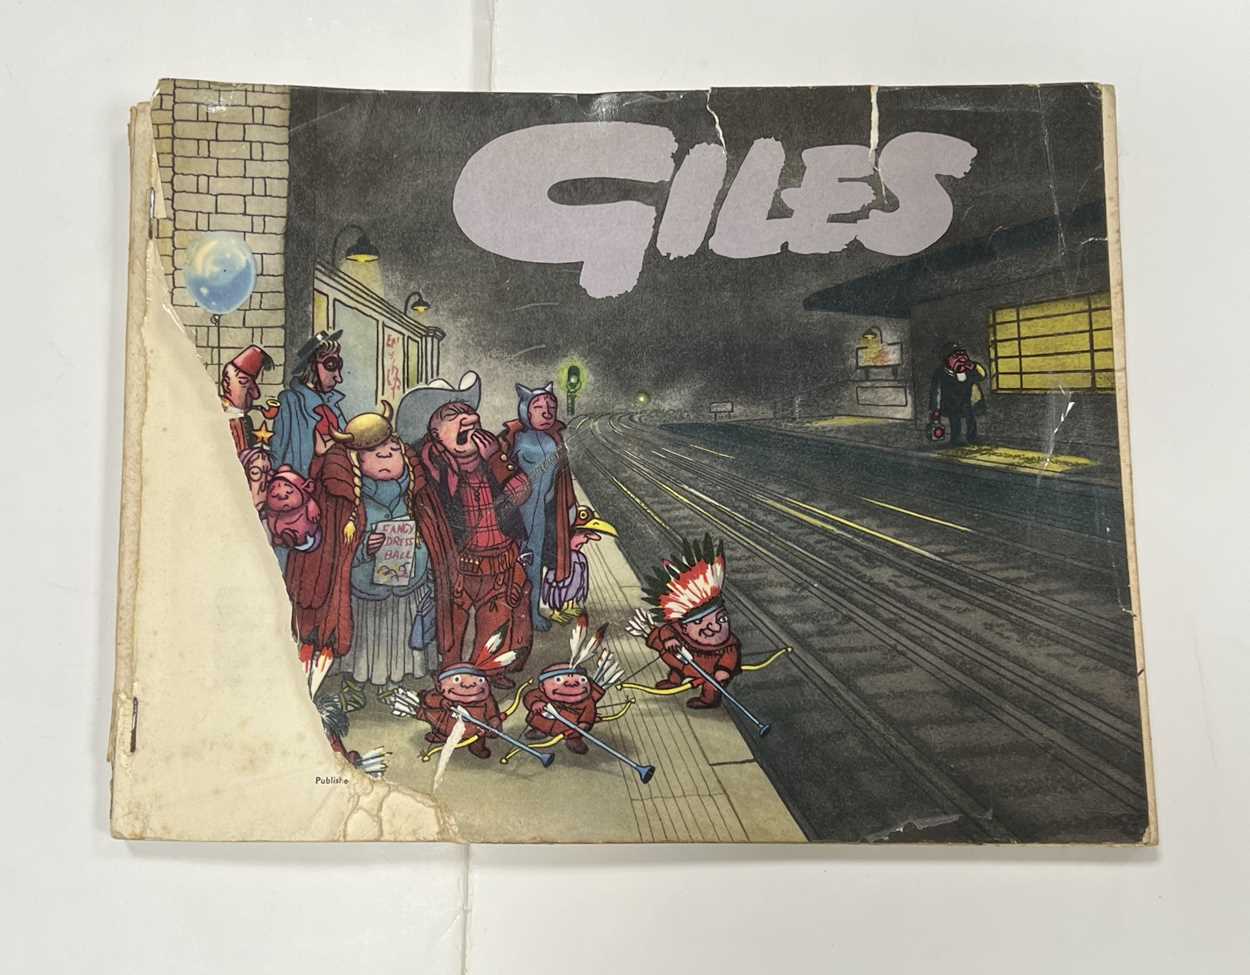 Giles - A collection of cartoon annuals from 1959, 1960, 1967, 1968, 1969, 1970, 1971, 1976, 1979, - Image 2 of 19